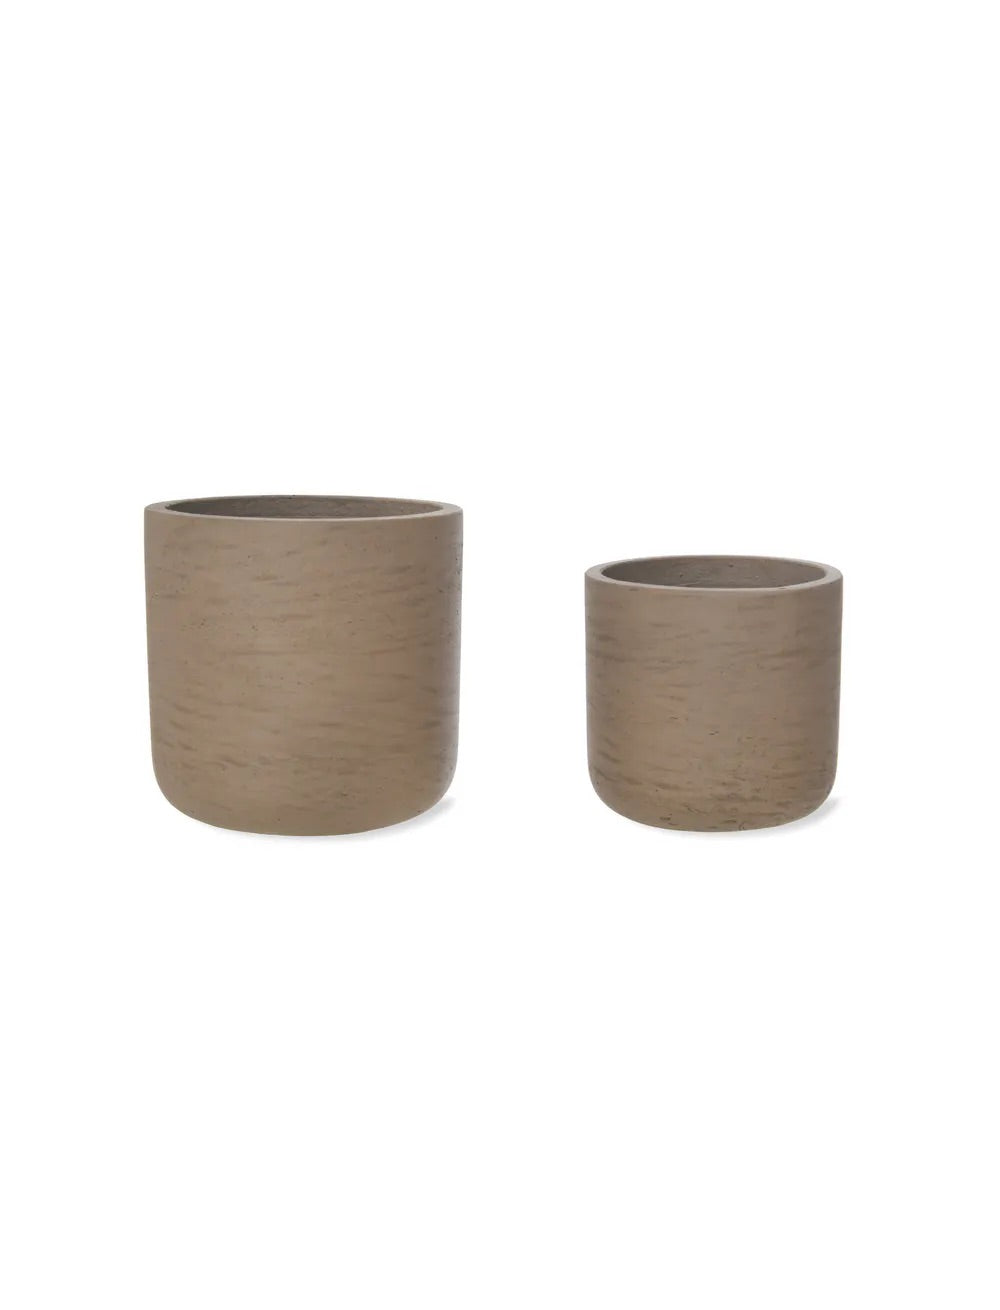 Set of 2 Cement Plant Pots in Warm Stone focus